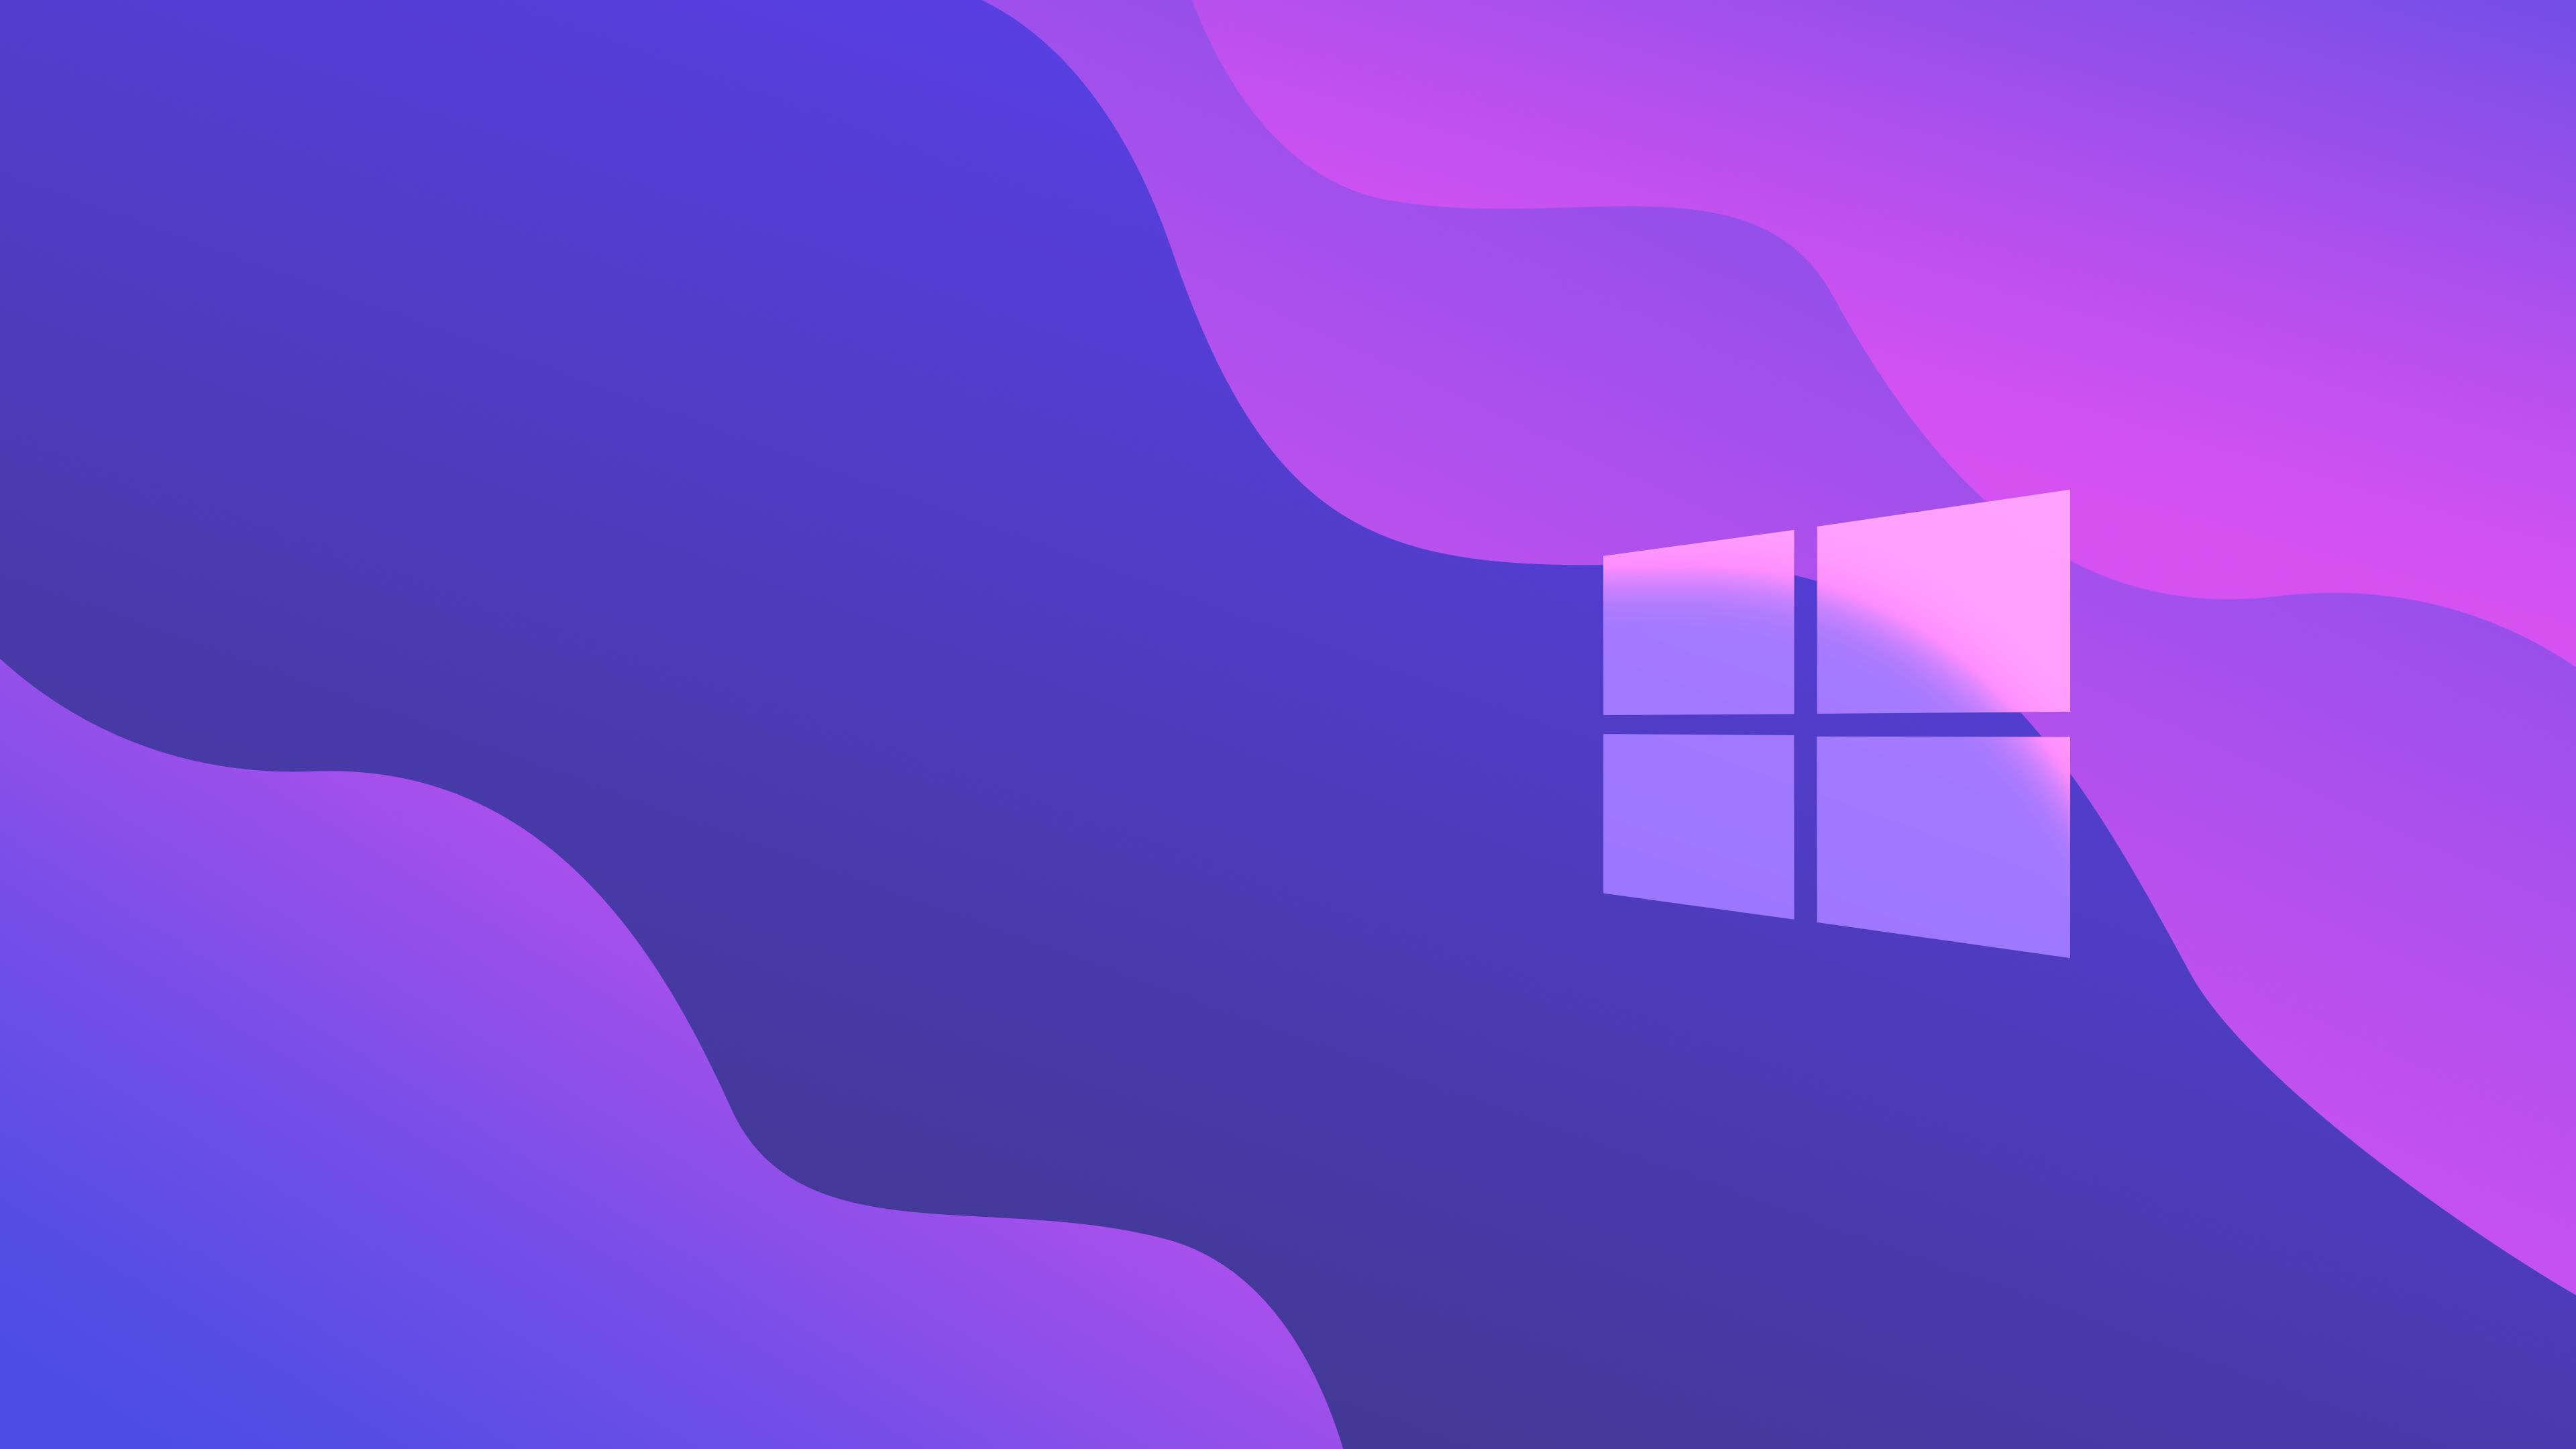 Windows 4K wallpapers for your desktop or mobile screen free and easy to download